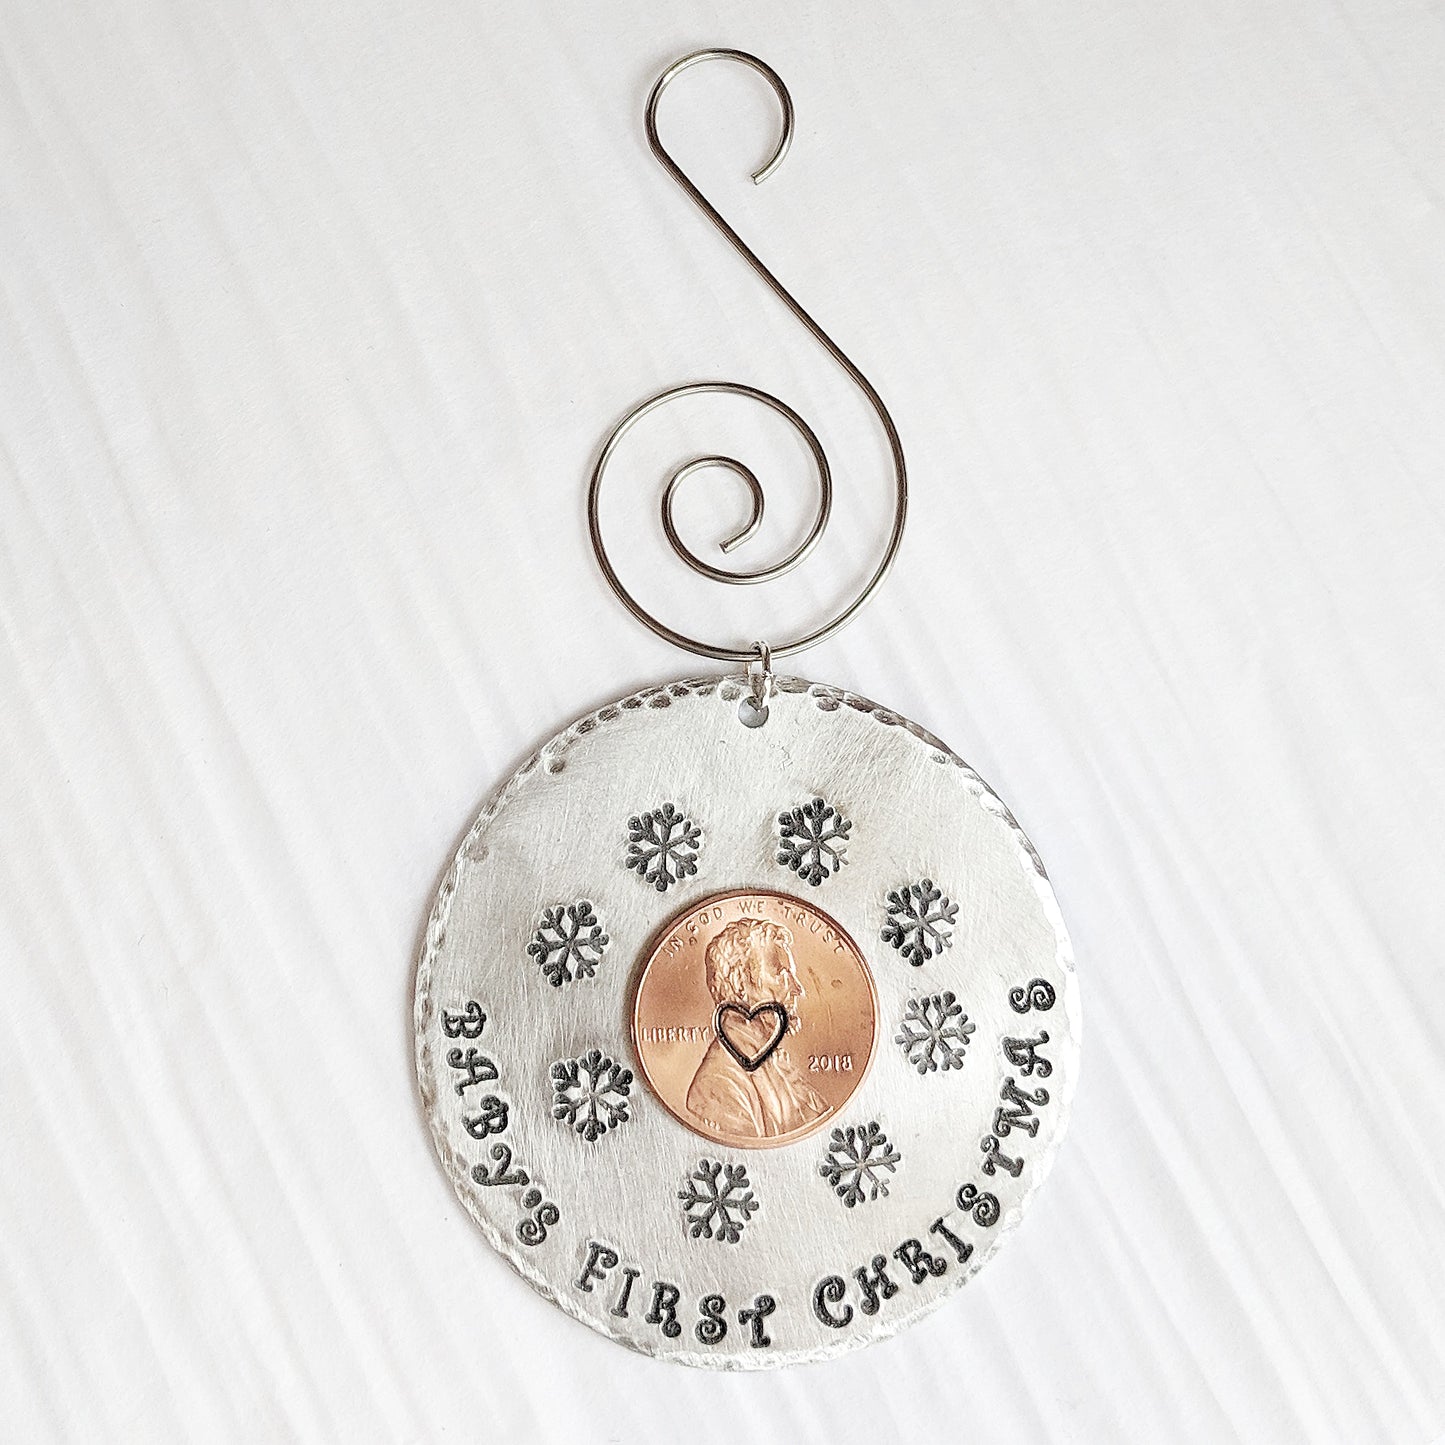 Baby's First Christmas Ornament with Real Penny - Collectible Baby Gift